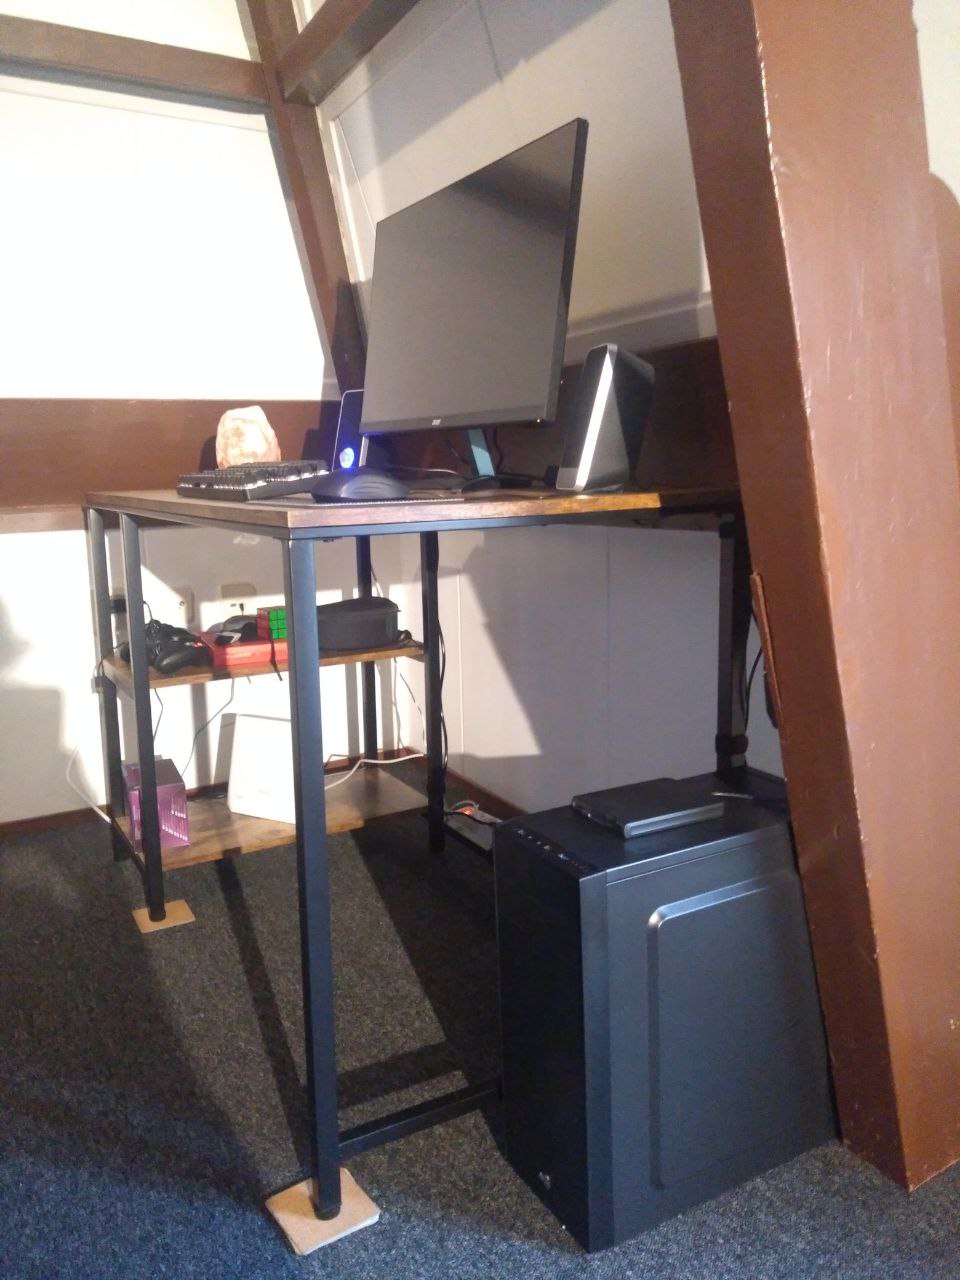 A low-quality picture of my desk with the new PC